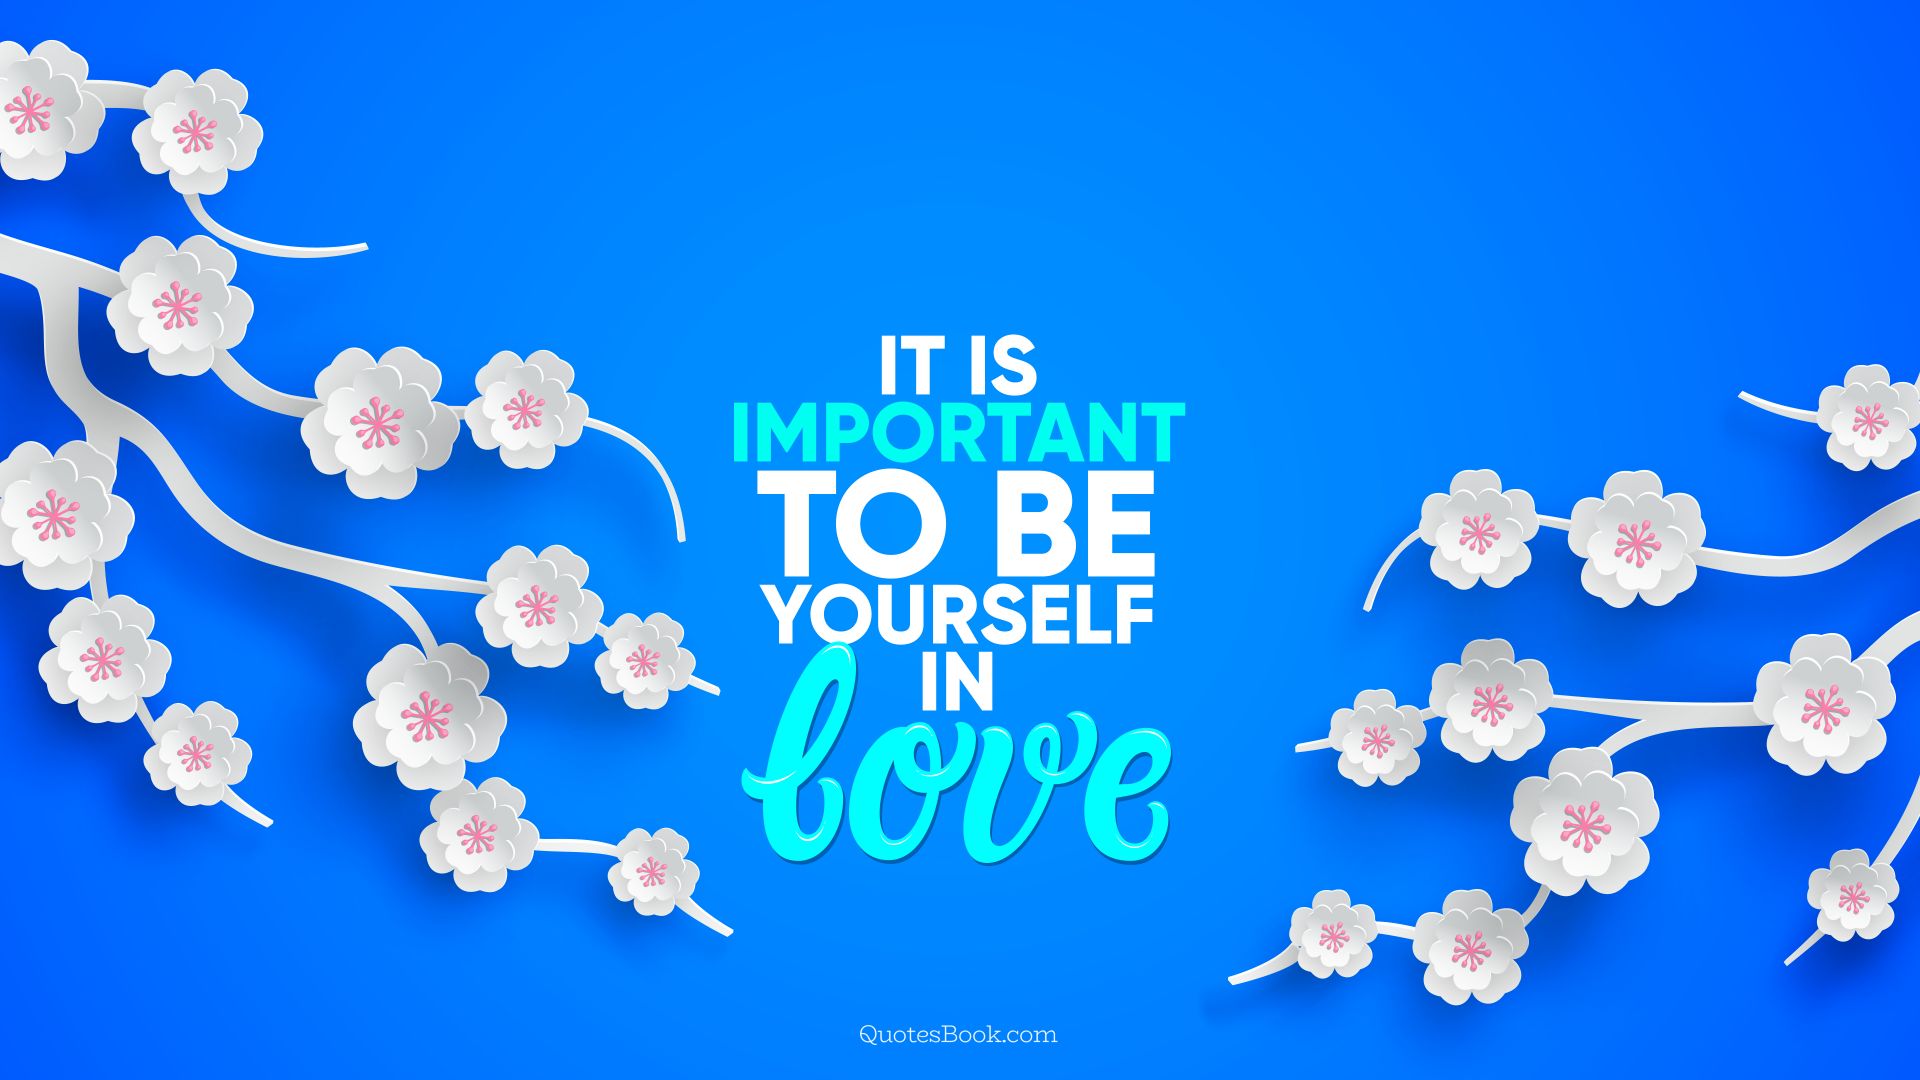 It is important to be yourself in love. - Quote by QuotesBook